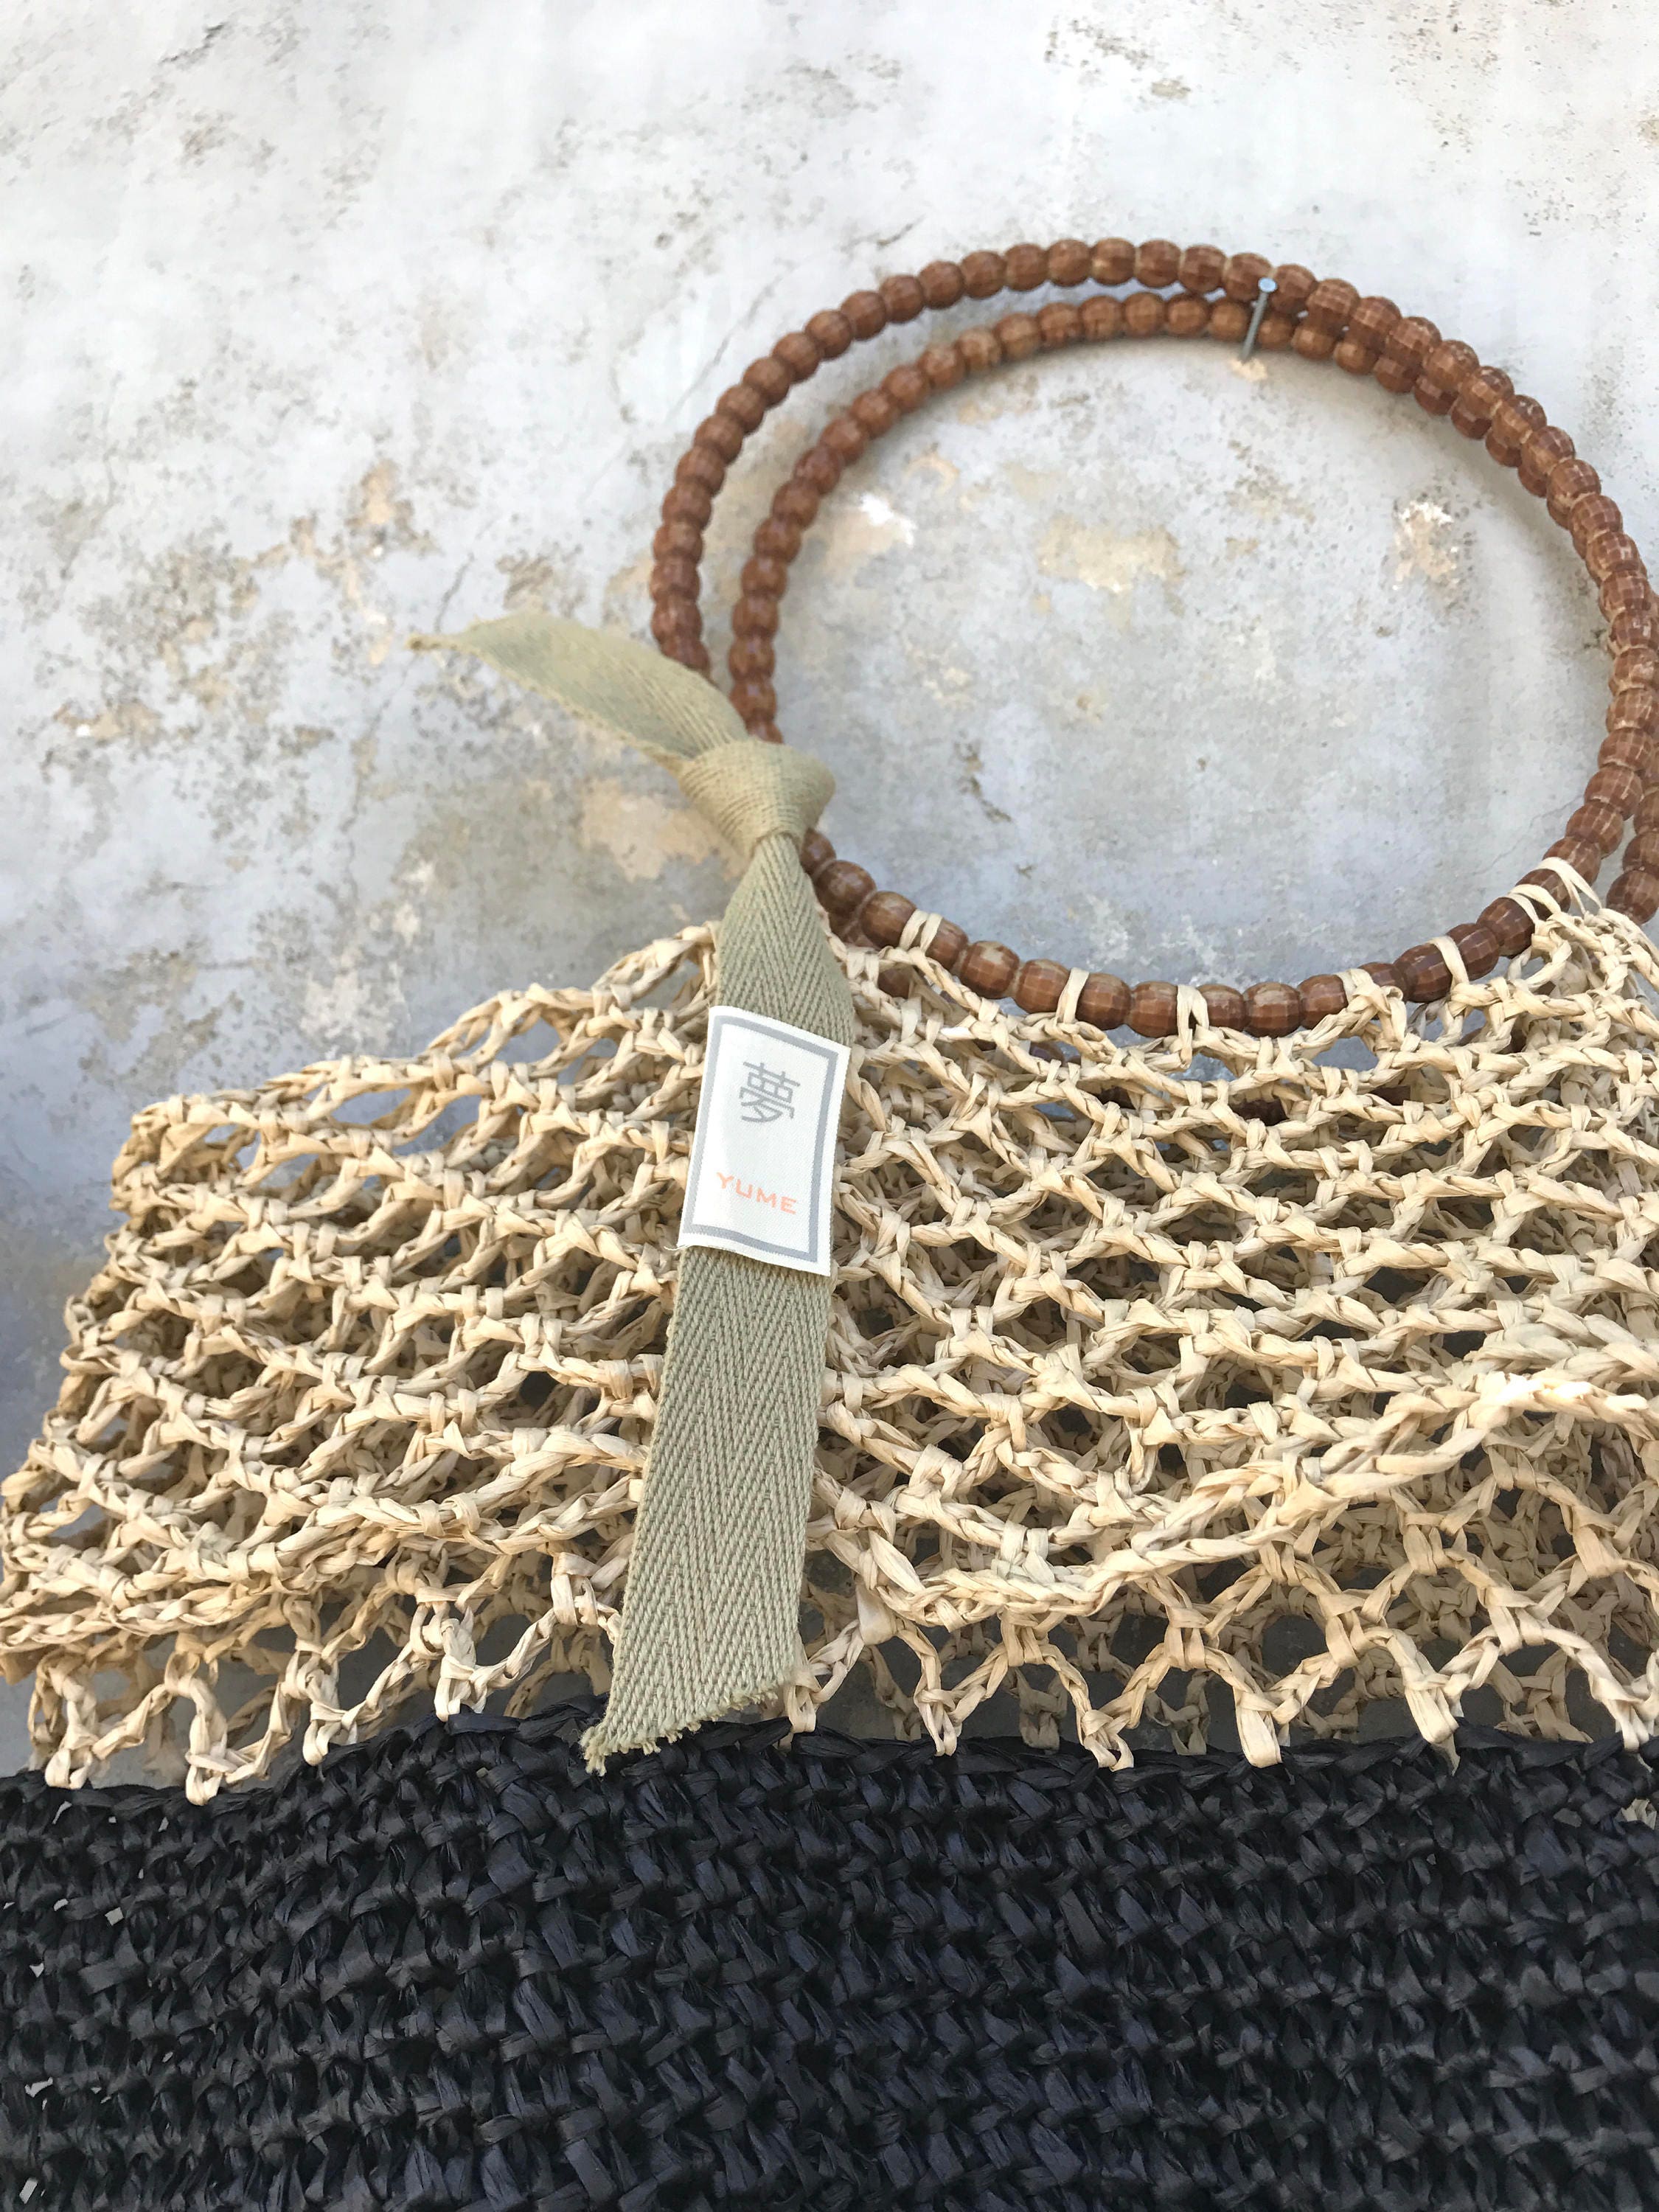 BLACK/NATURAL RAFFIA Bag. Double colour hand knitted natural straw bag ...